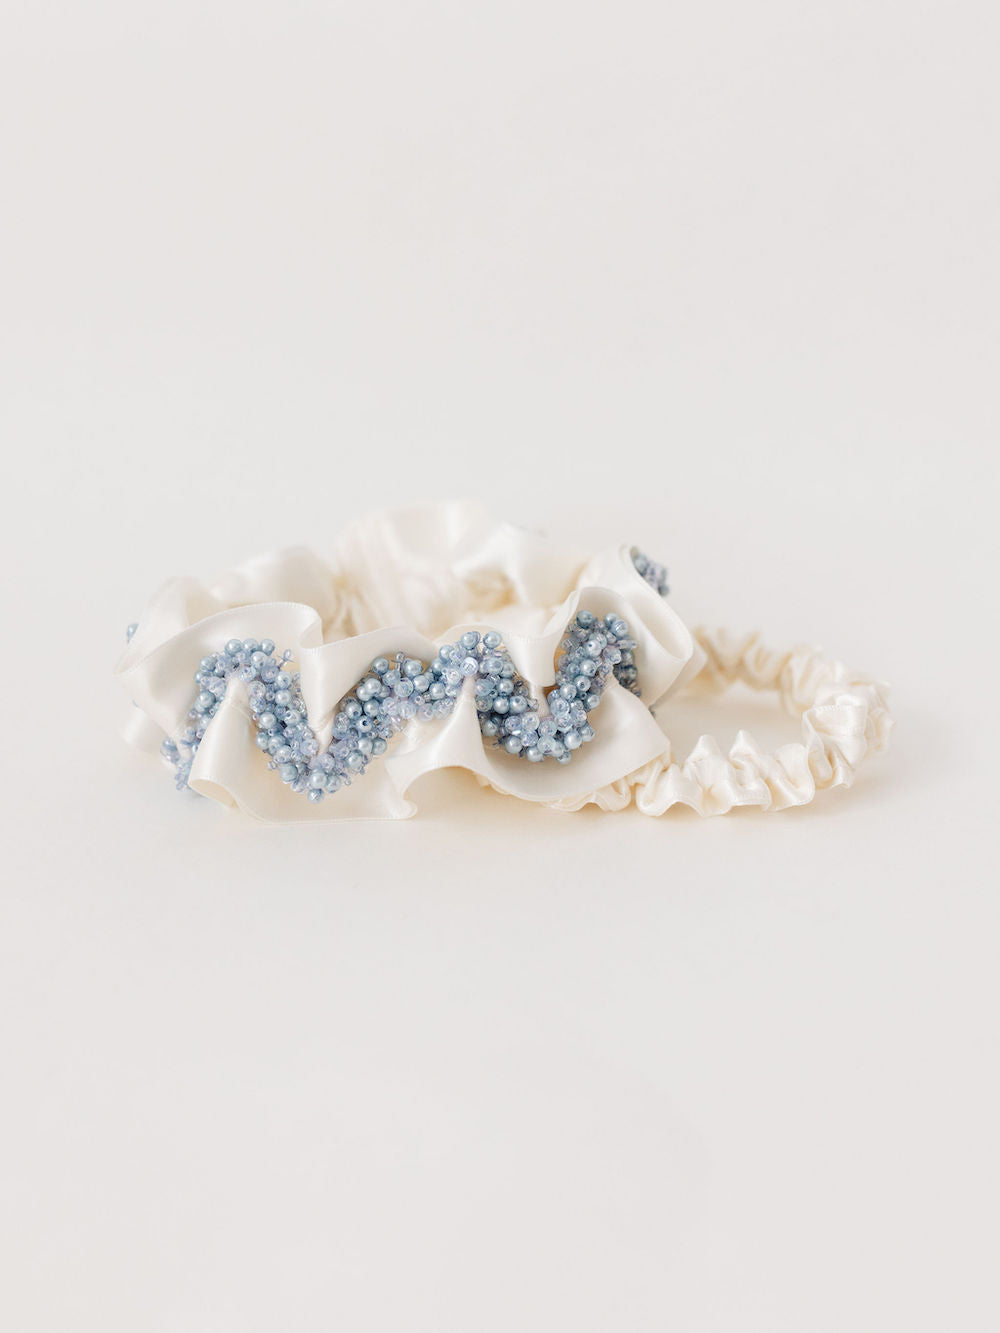 heirloom garter set with ivory satin and a main garter with blue sparkly beading handmade by The Garter Girl